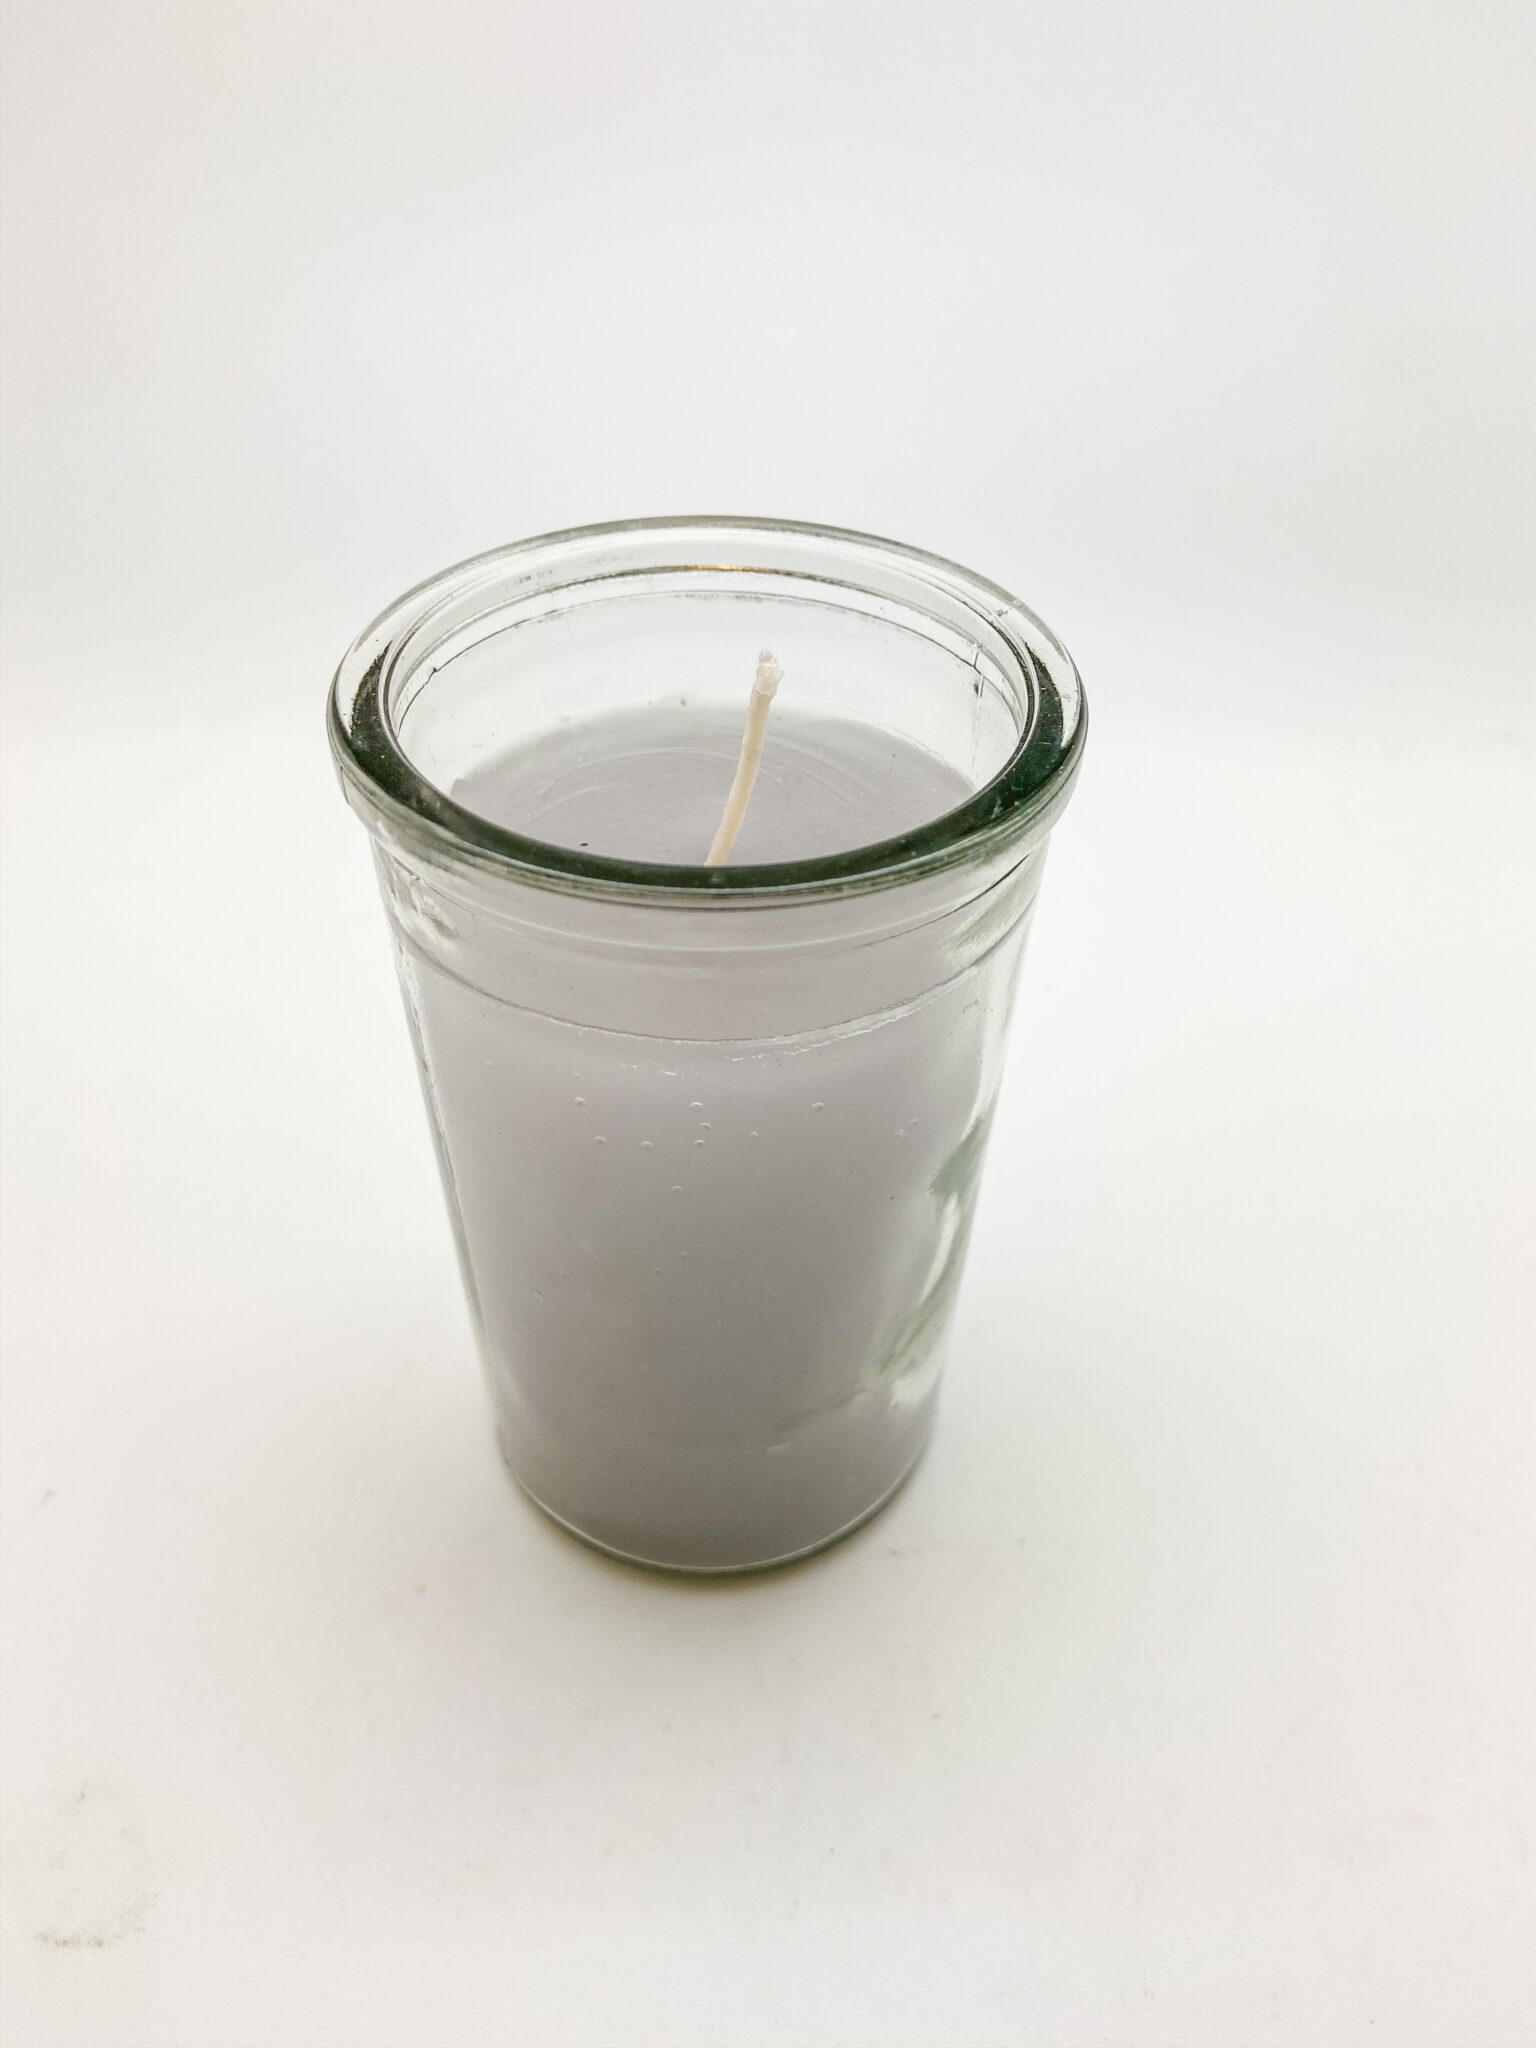 Gray 2 Day Candle